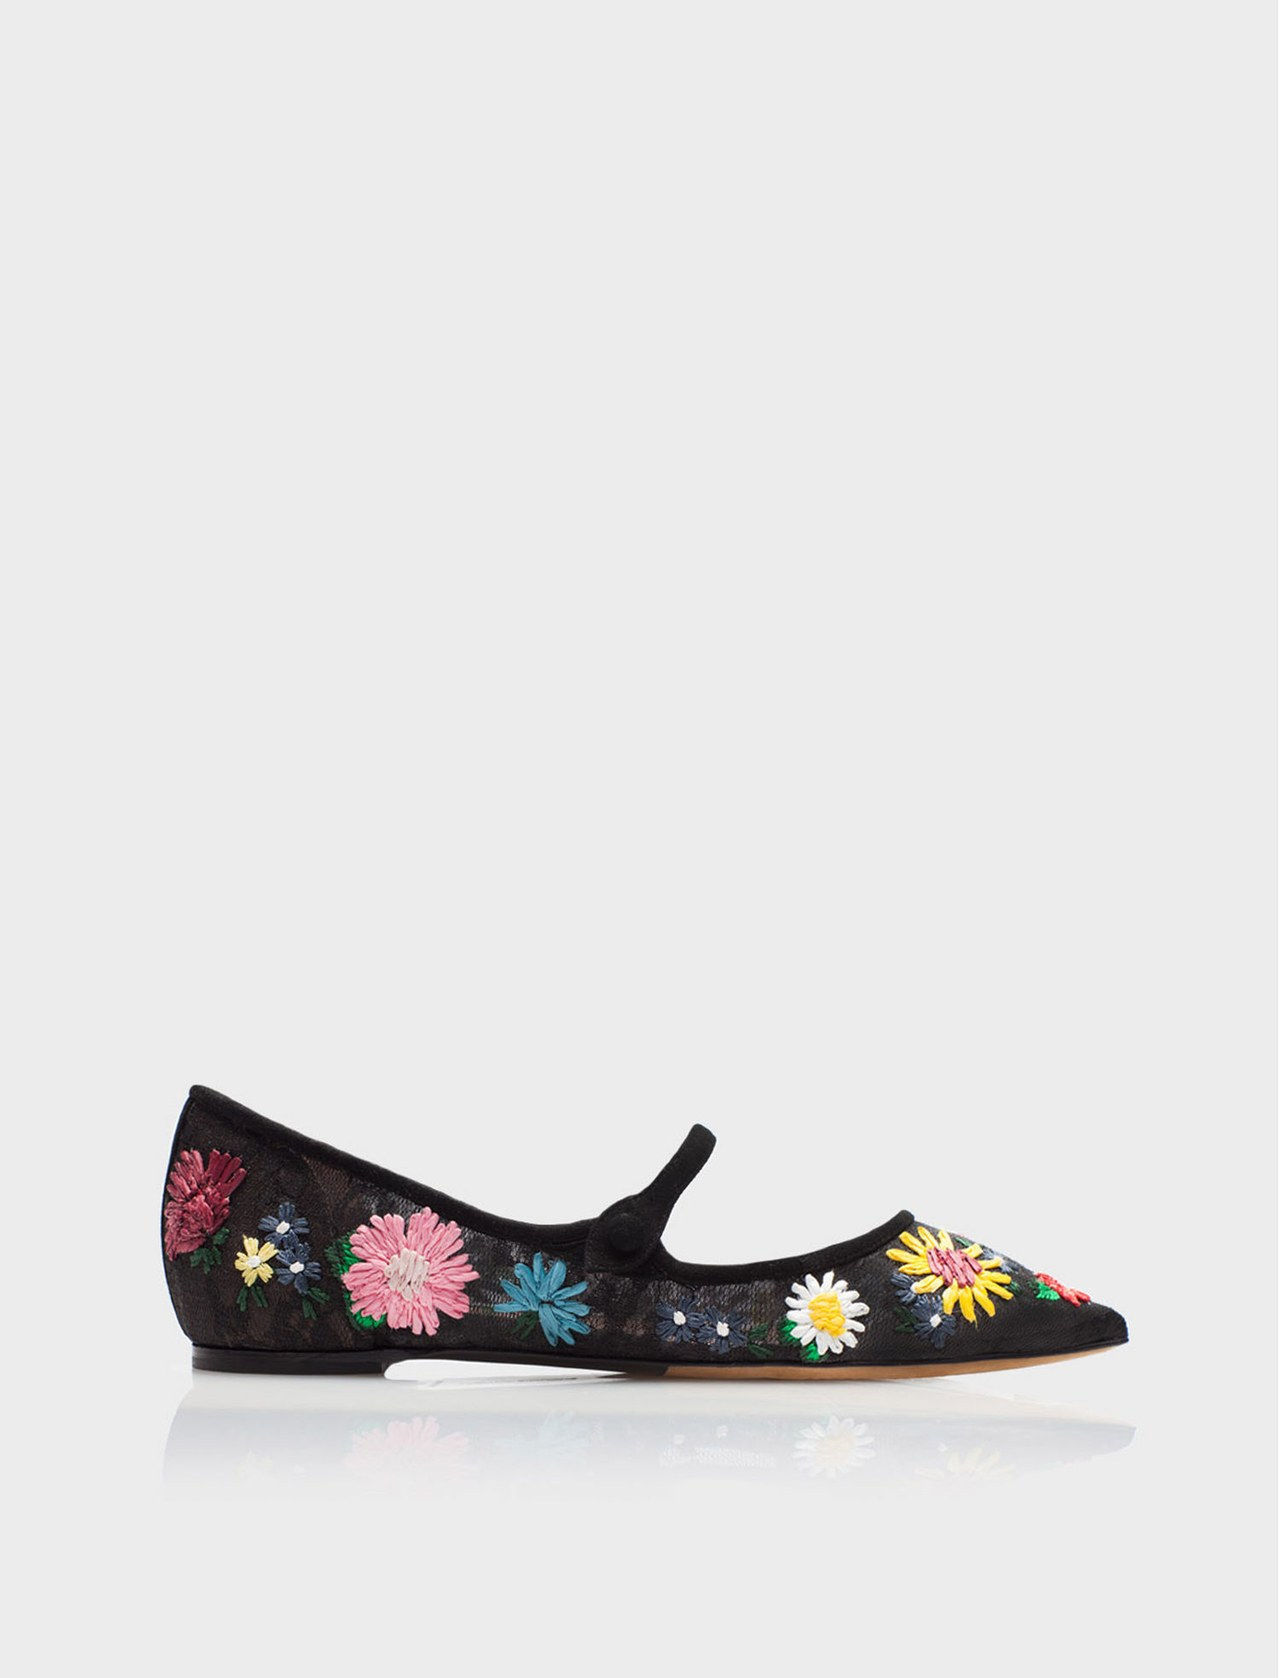 Tabitha simmons shoes hermione flats ave 32